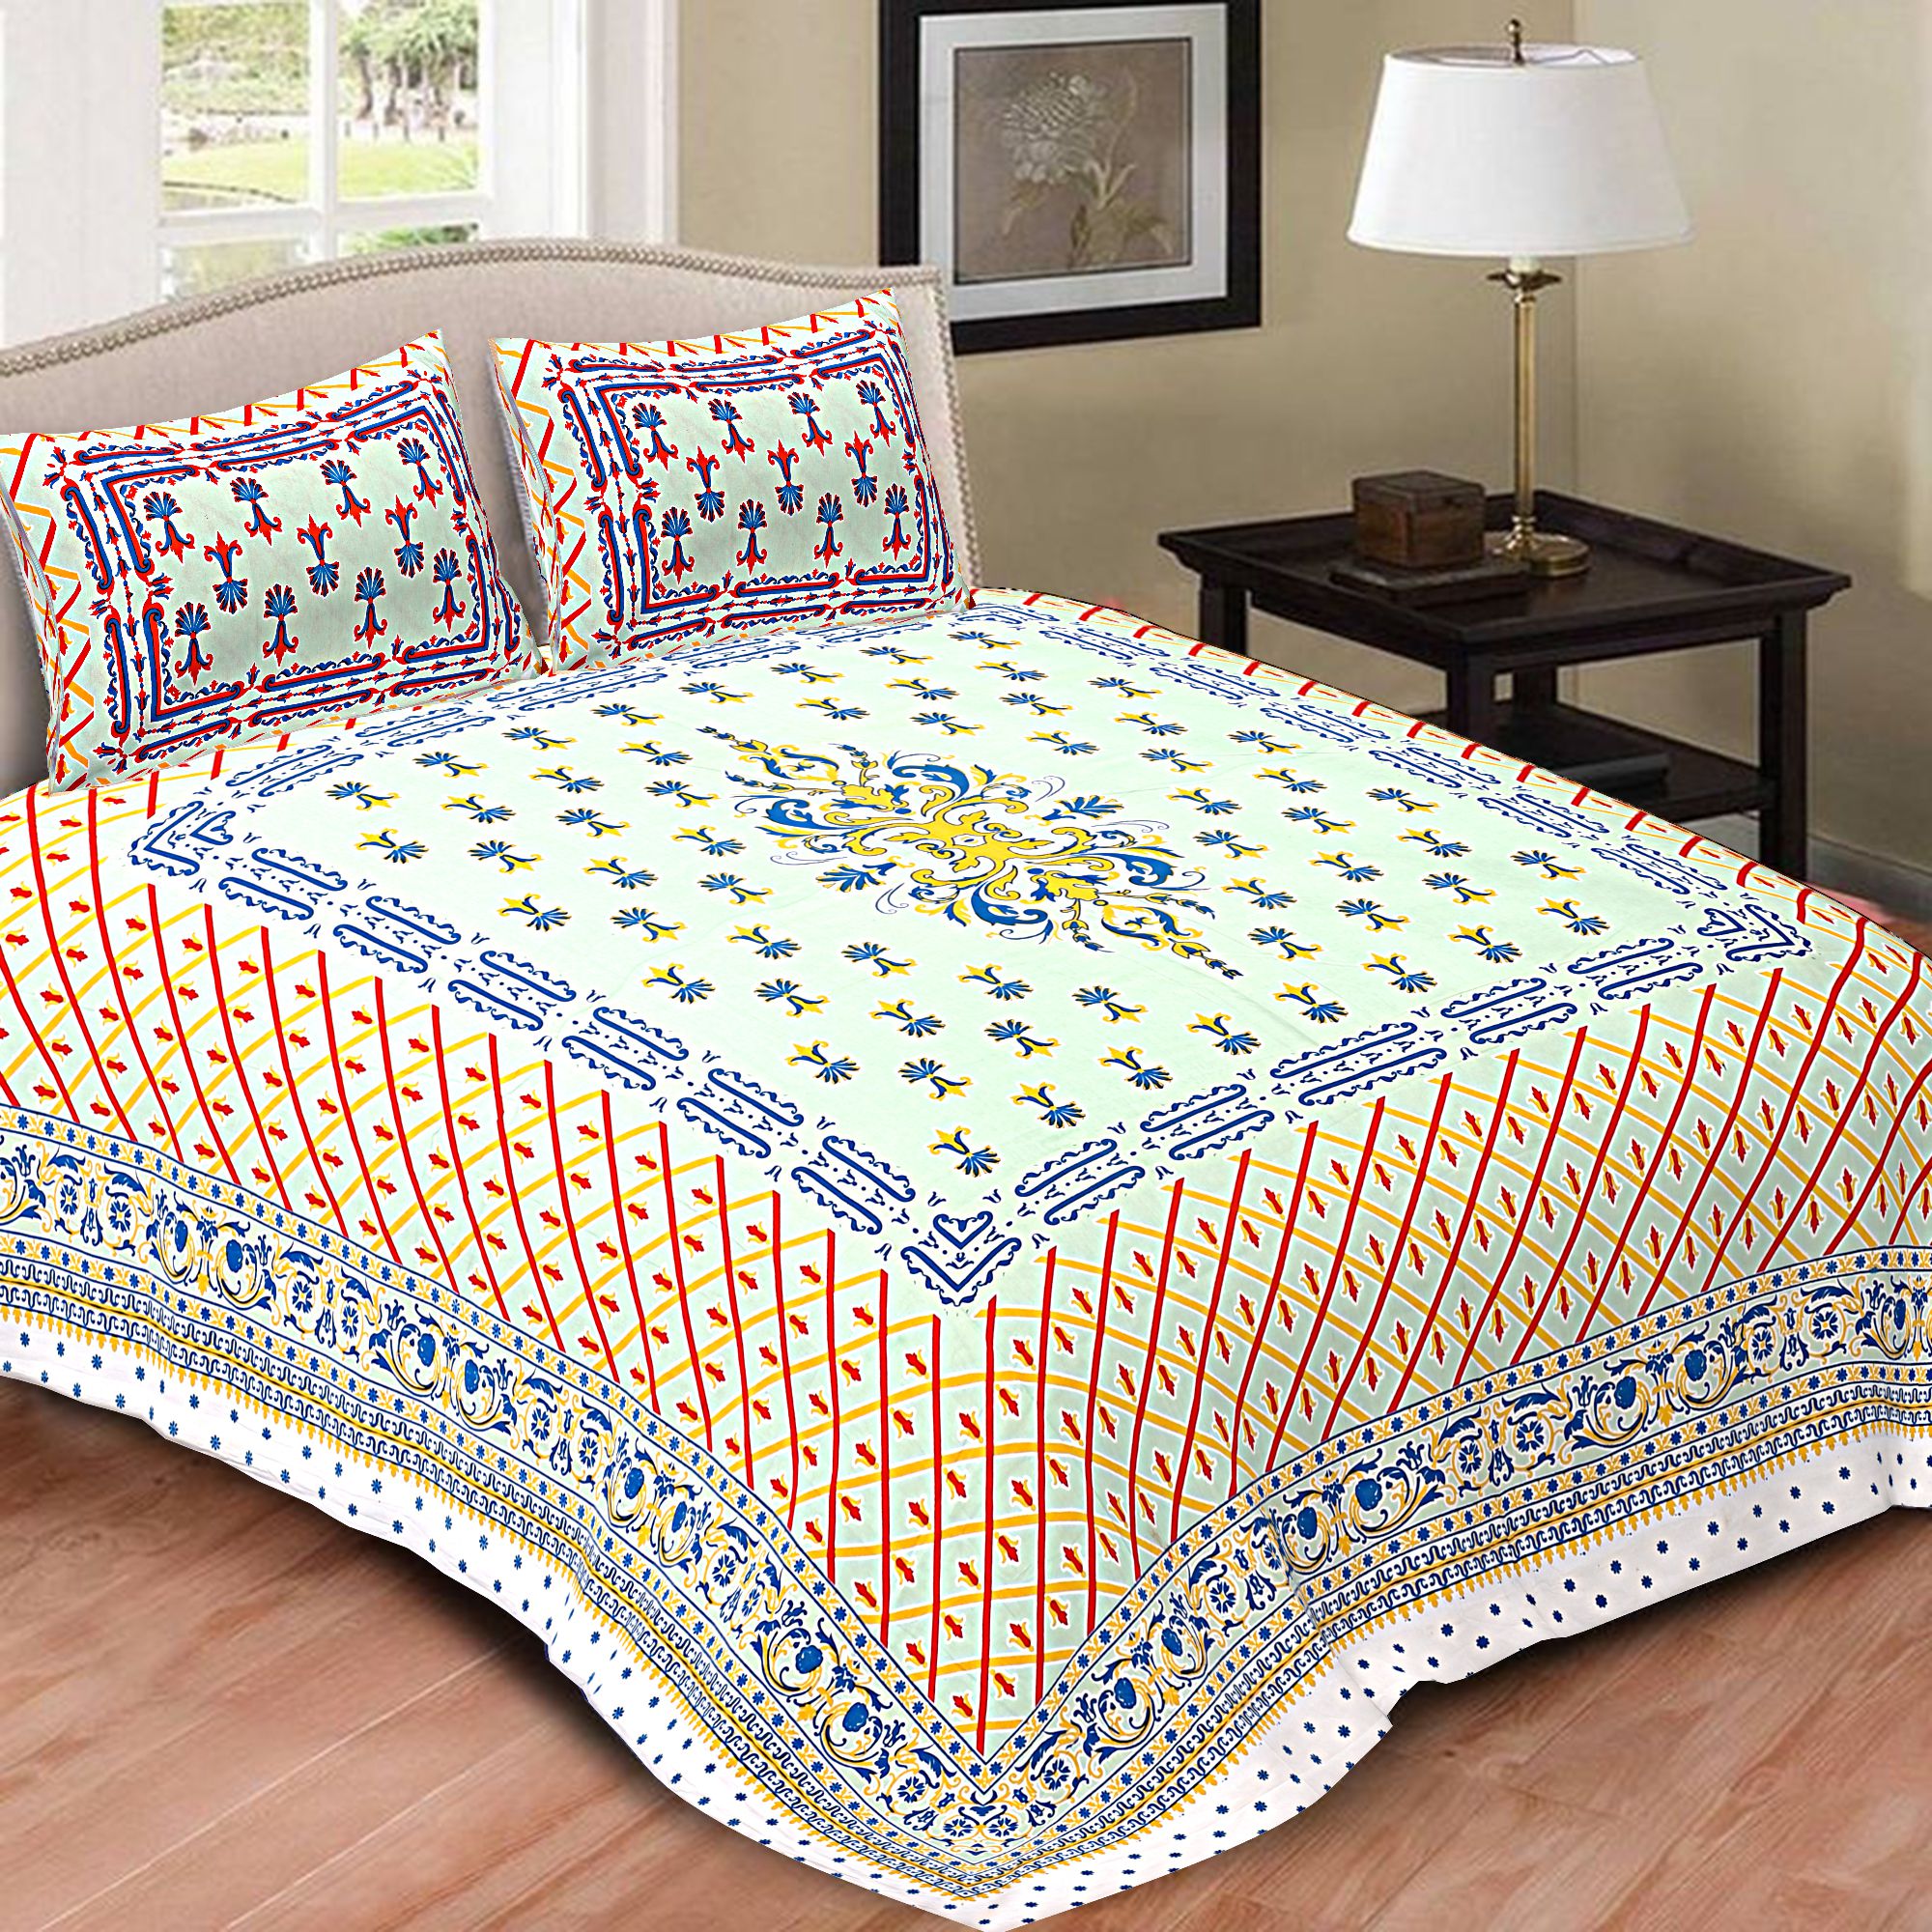 Lovely Prints Cotton Double Bedsheet with 2 Pillow Covers - Buy Lovely Prints Cotton Double